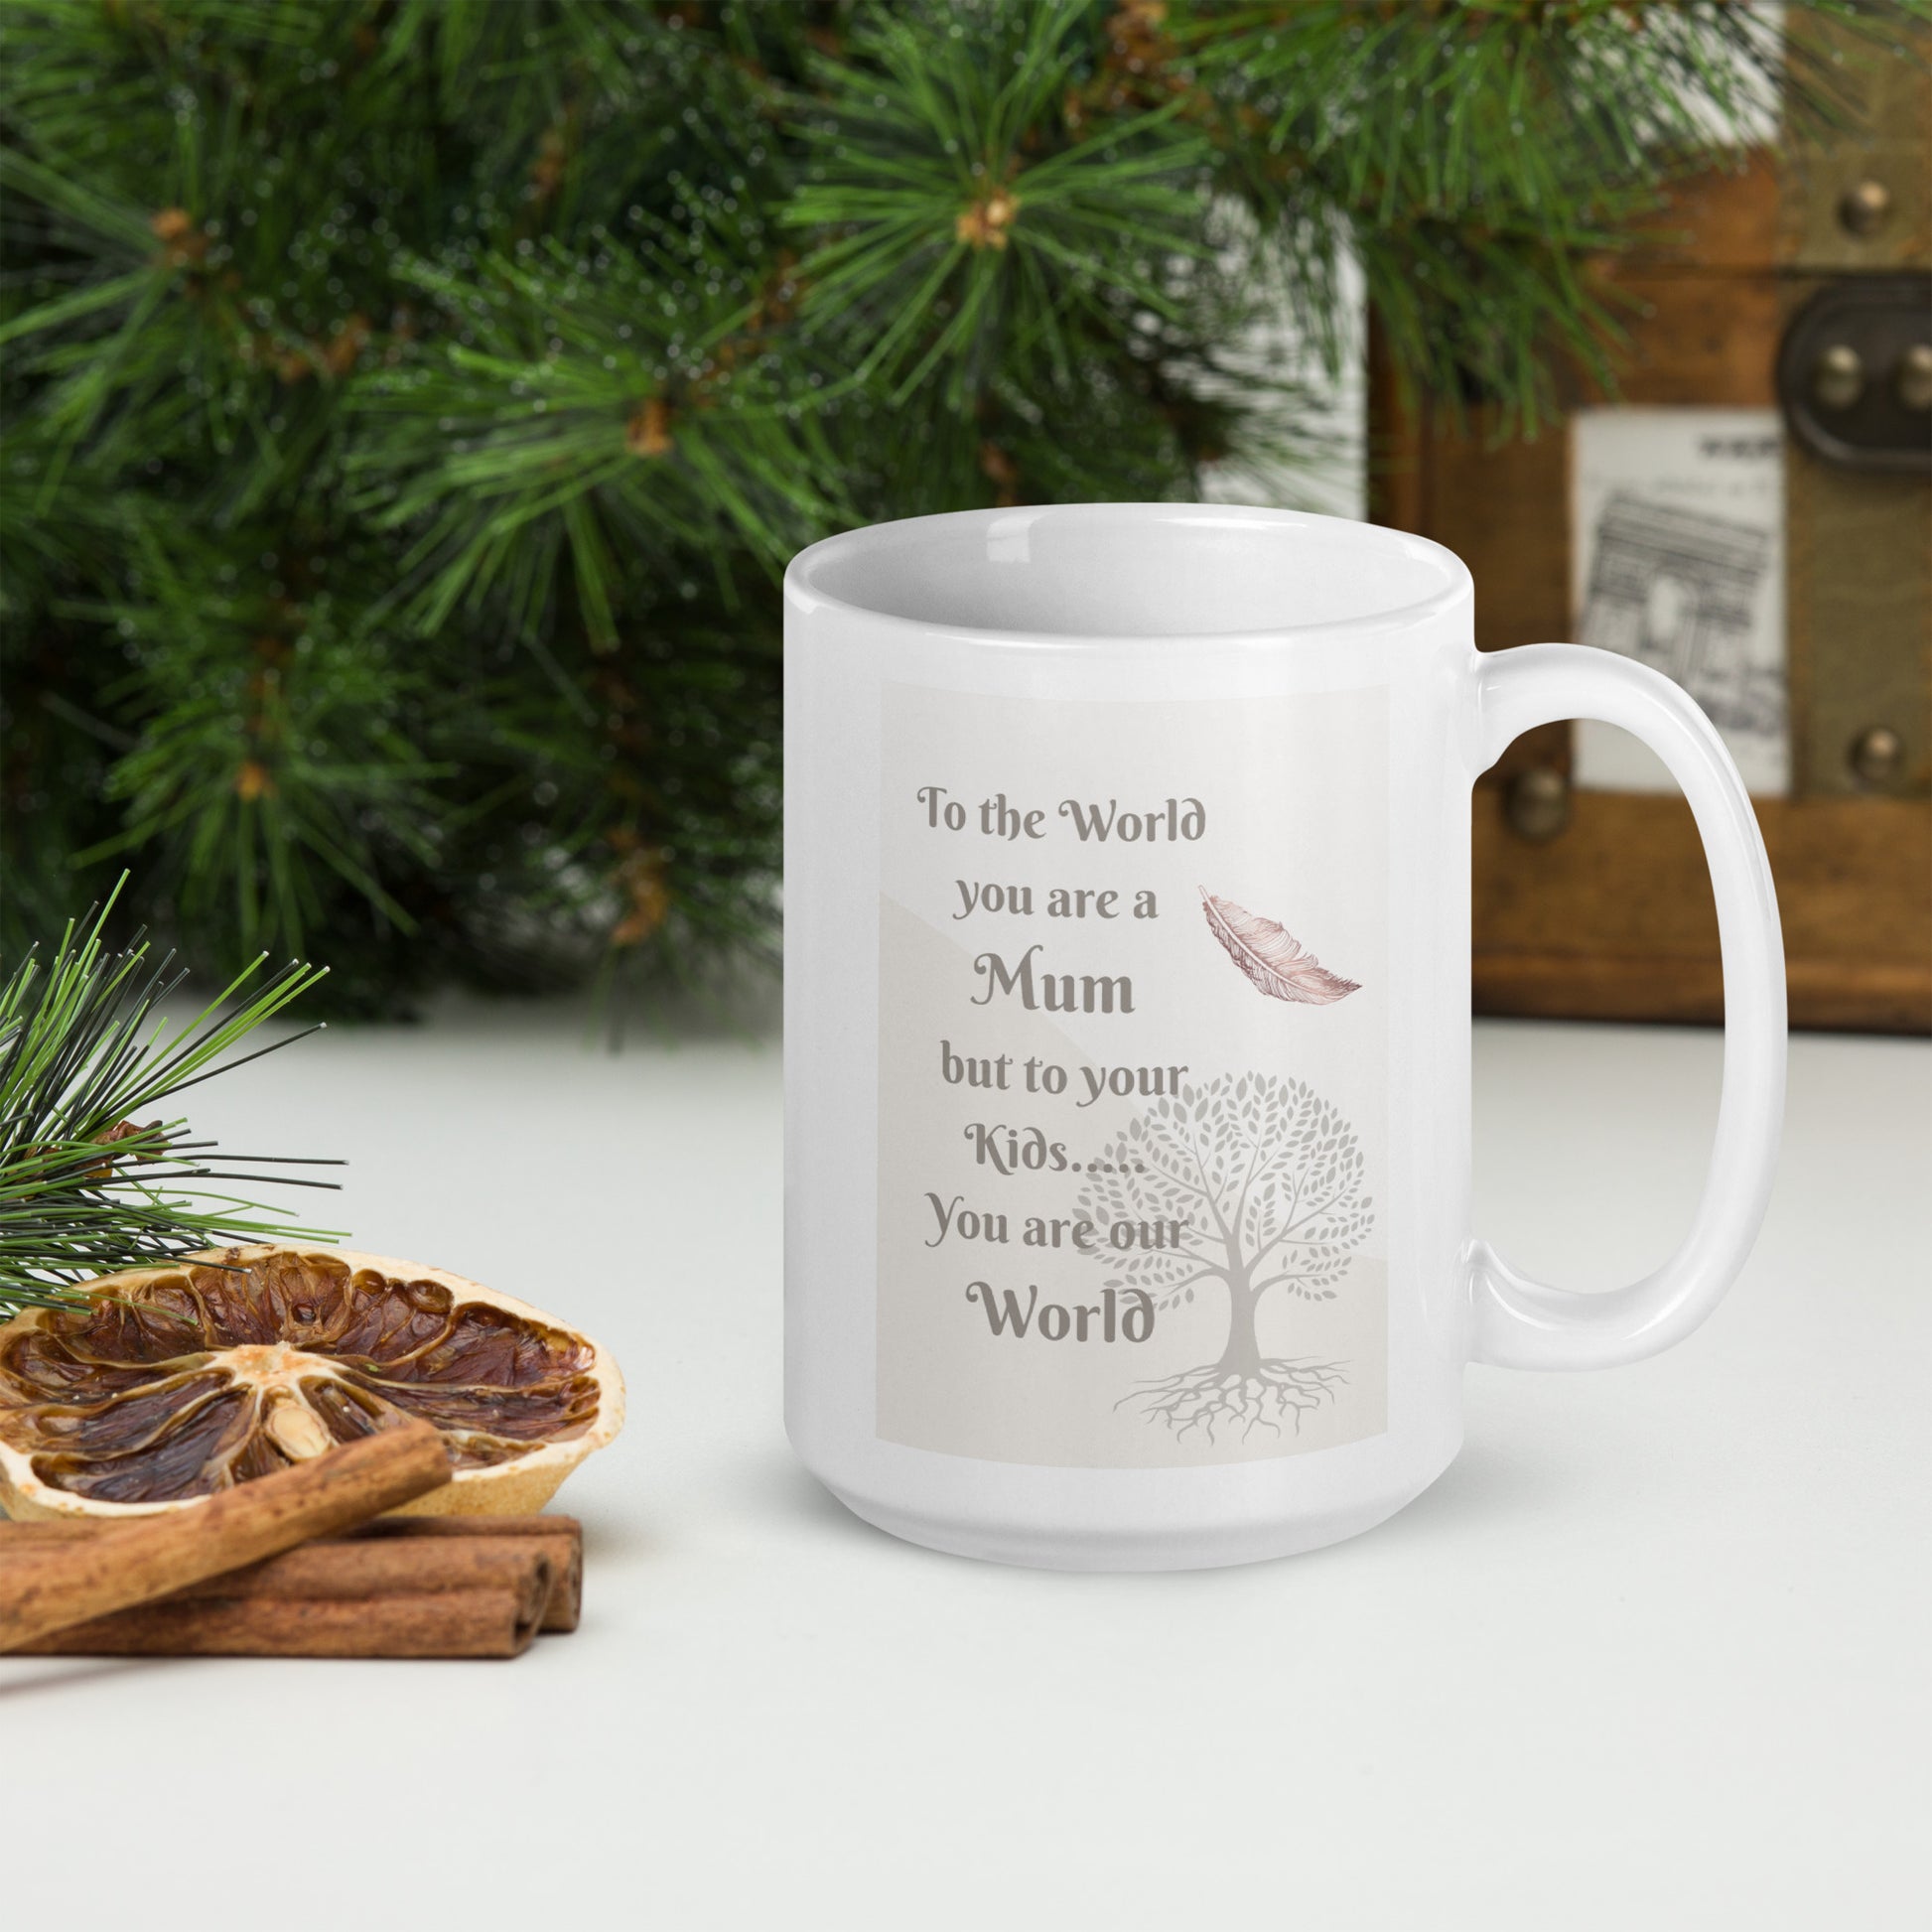 White Ceramic Mug - To the World you are our Mum, but to your kids you are our World